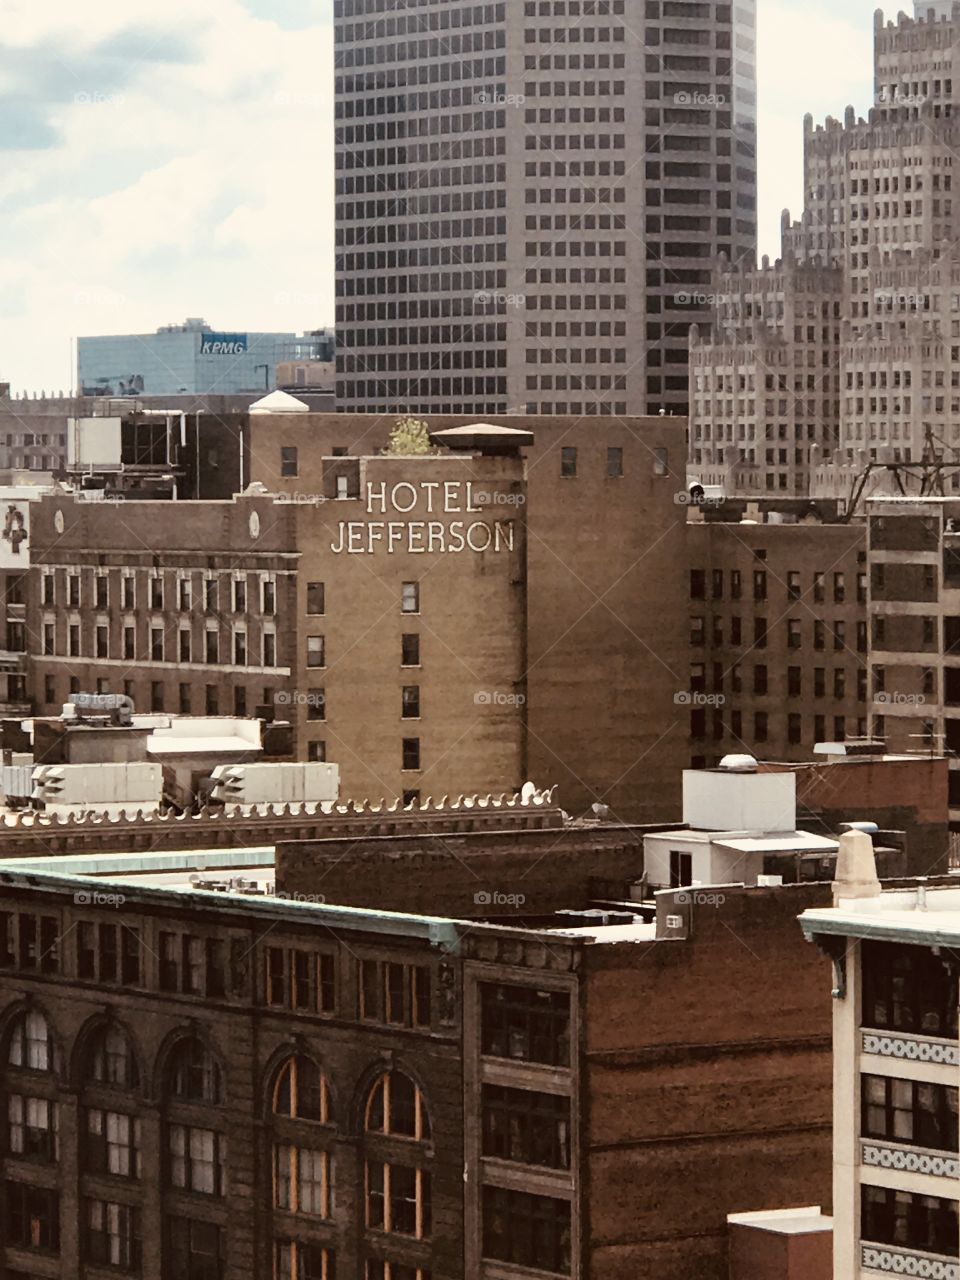 A nice rooftop view of this vintage Hotel in the heart of beautiful St. Louis, Missouri. 